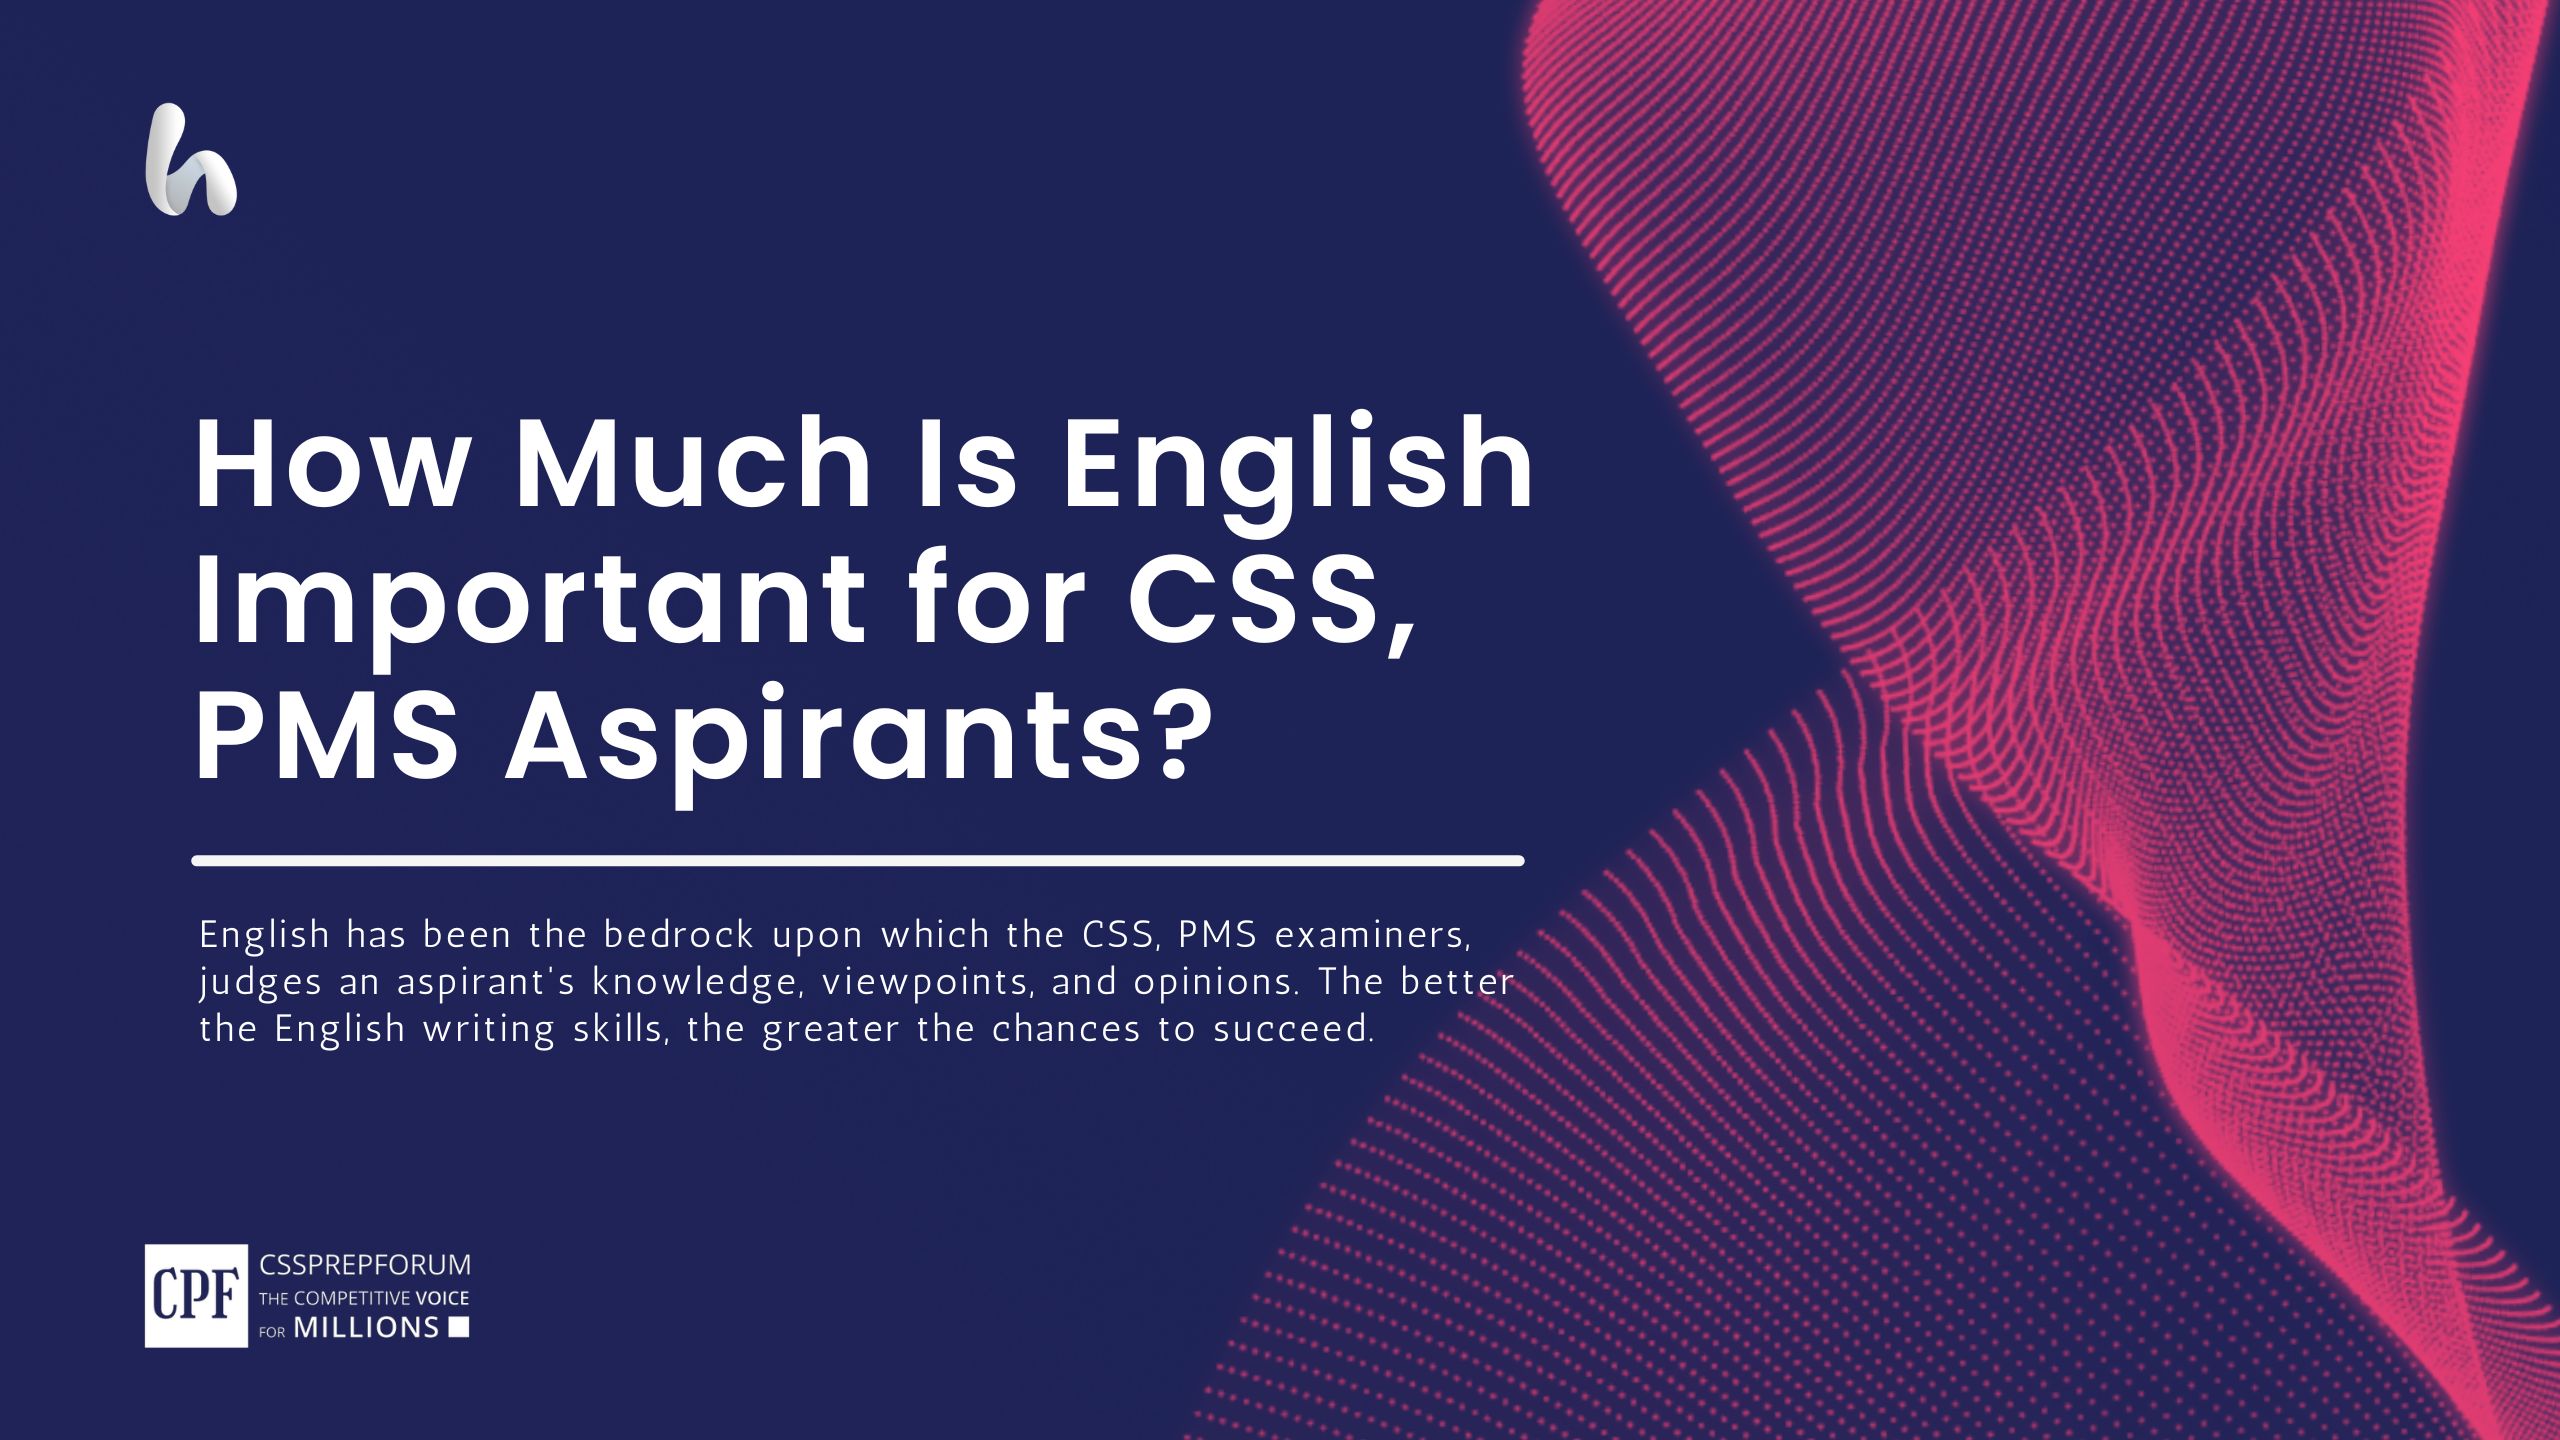 How Much Is English Important for CSS, PMS Aspirants